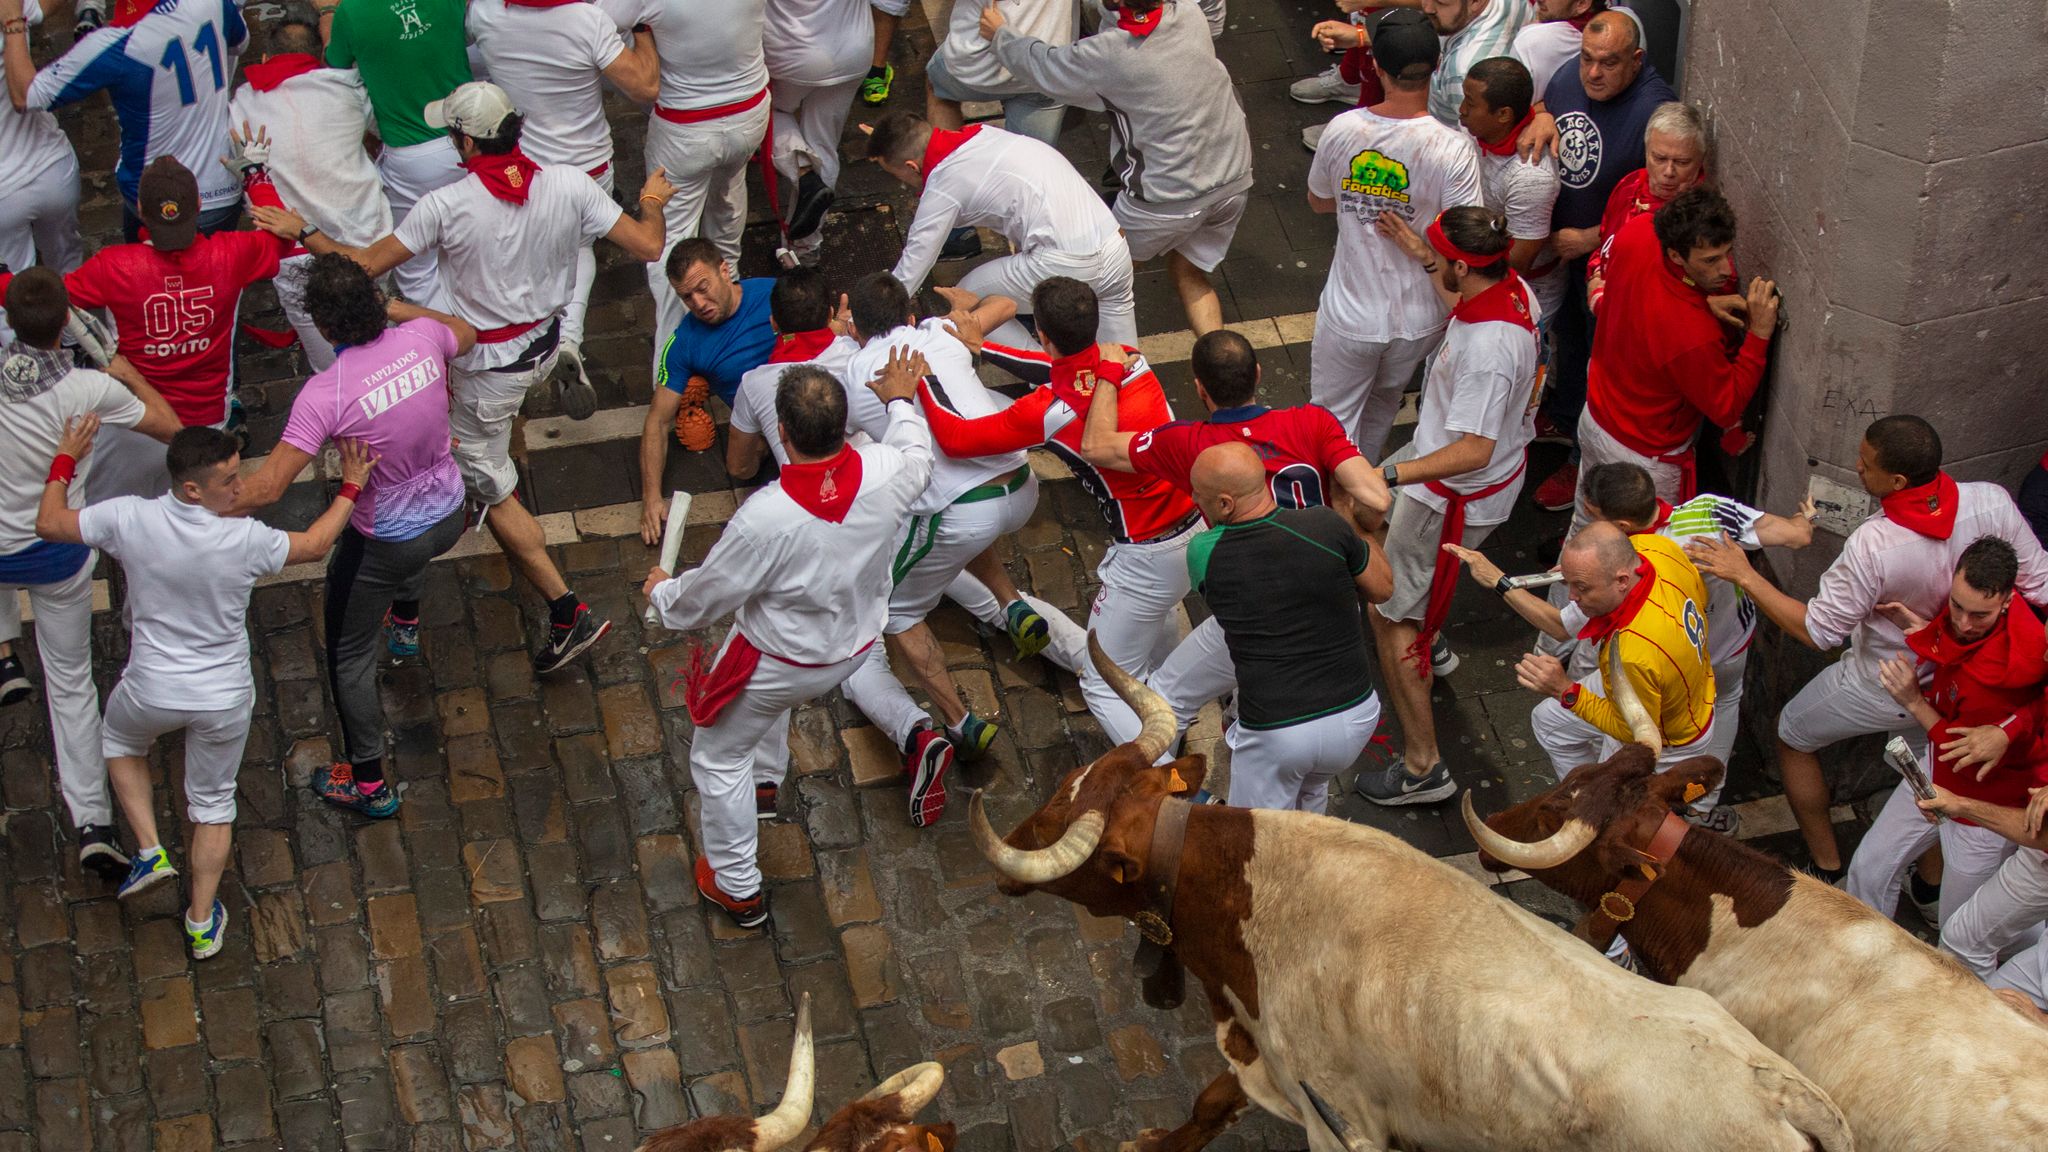 Man gored and four badly injured on first day of Pamplona bull run | World  News | Sky News